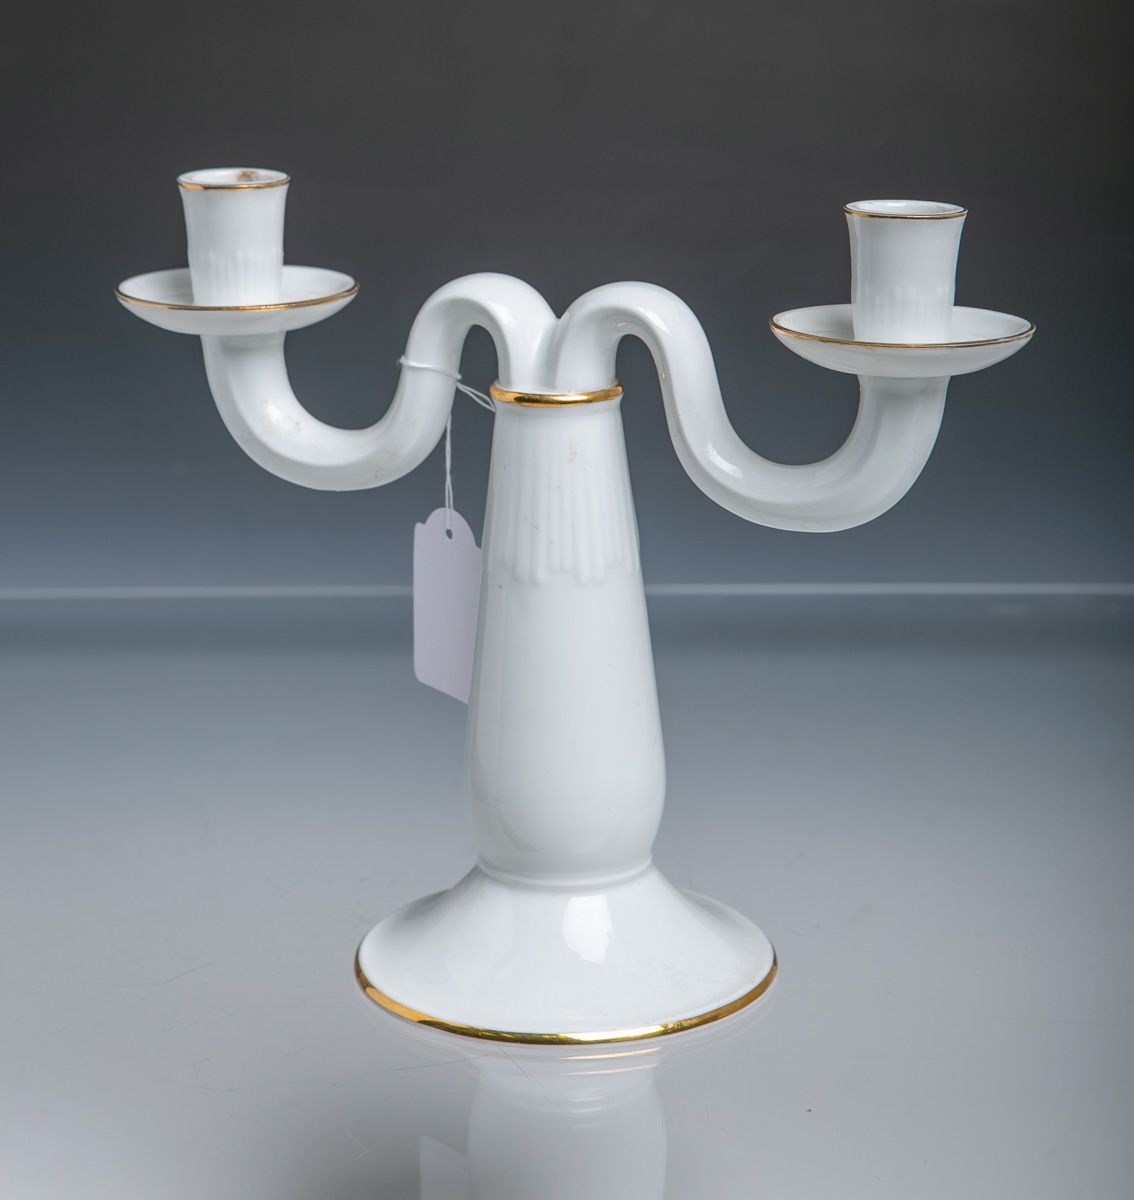 Null Two-flame candlestick (Meissen, probably 20th c.) in the style of art deco,&hellip;